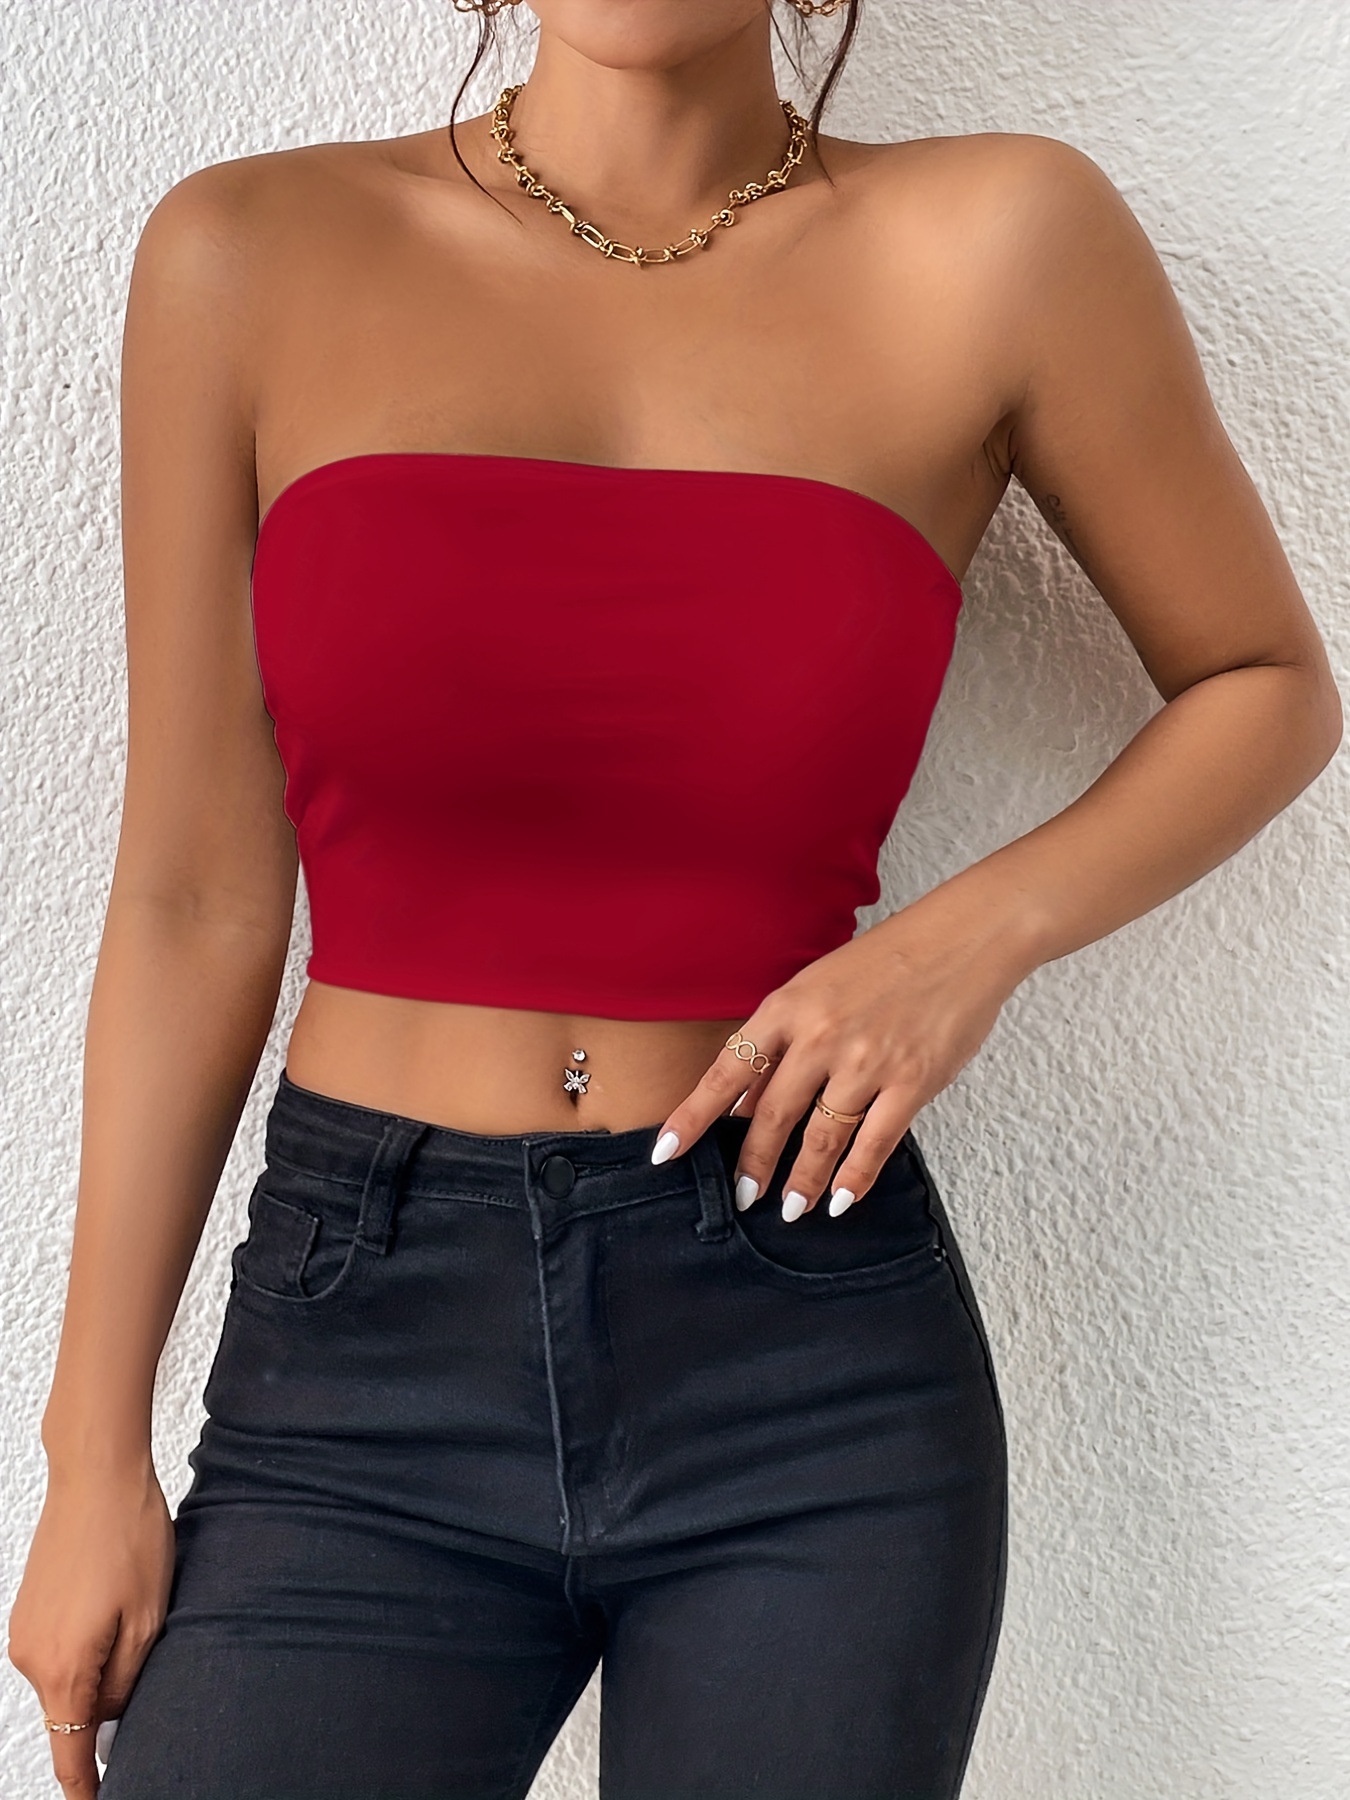 Sexy Bodycon Crop Tube Top, Solid Stretchy Tube Top, Casual Every Day Tops,  Women's Clothing